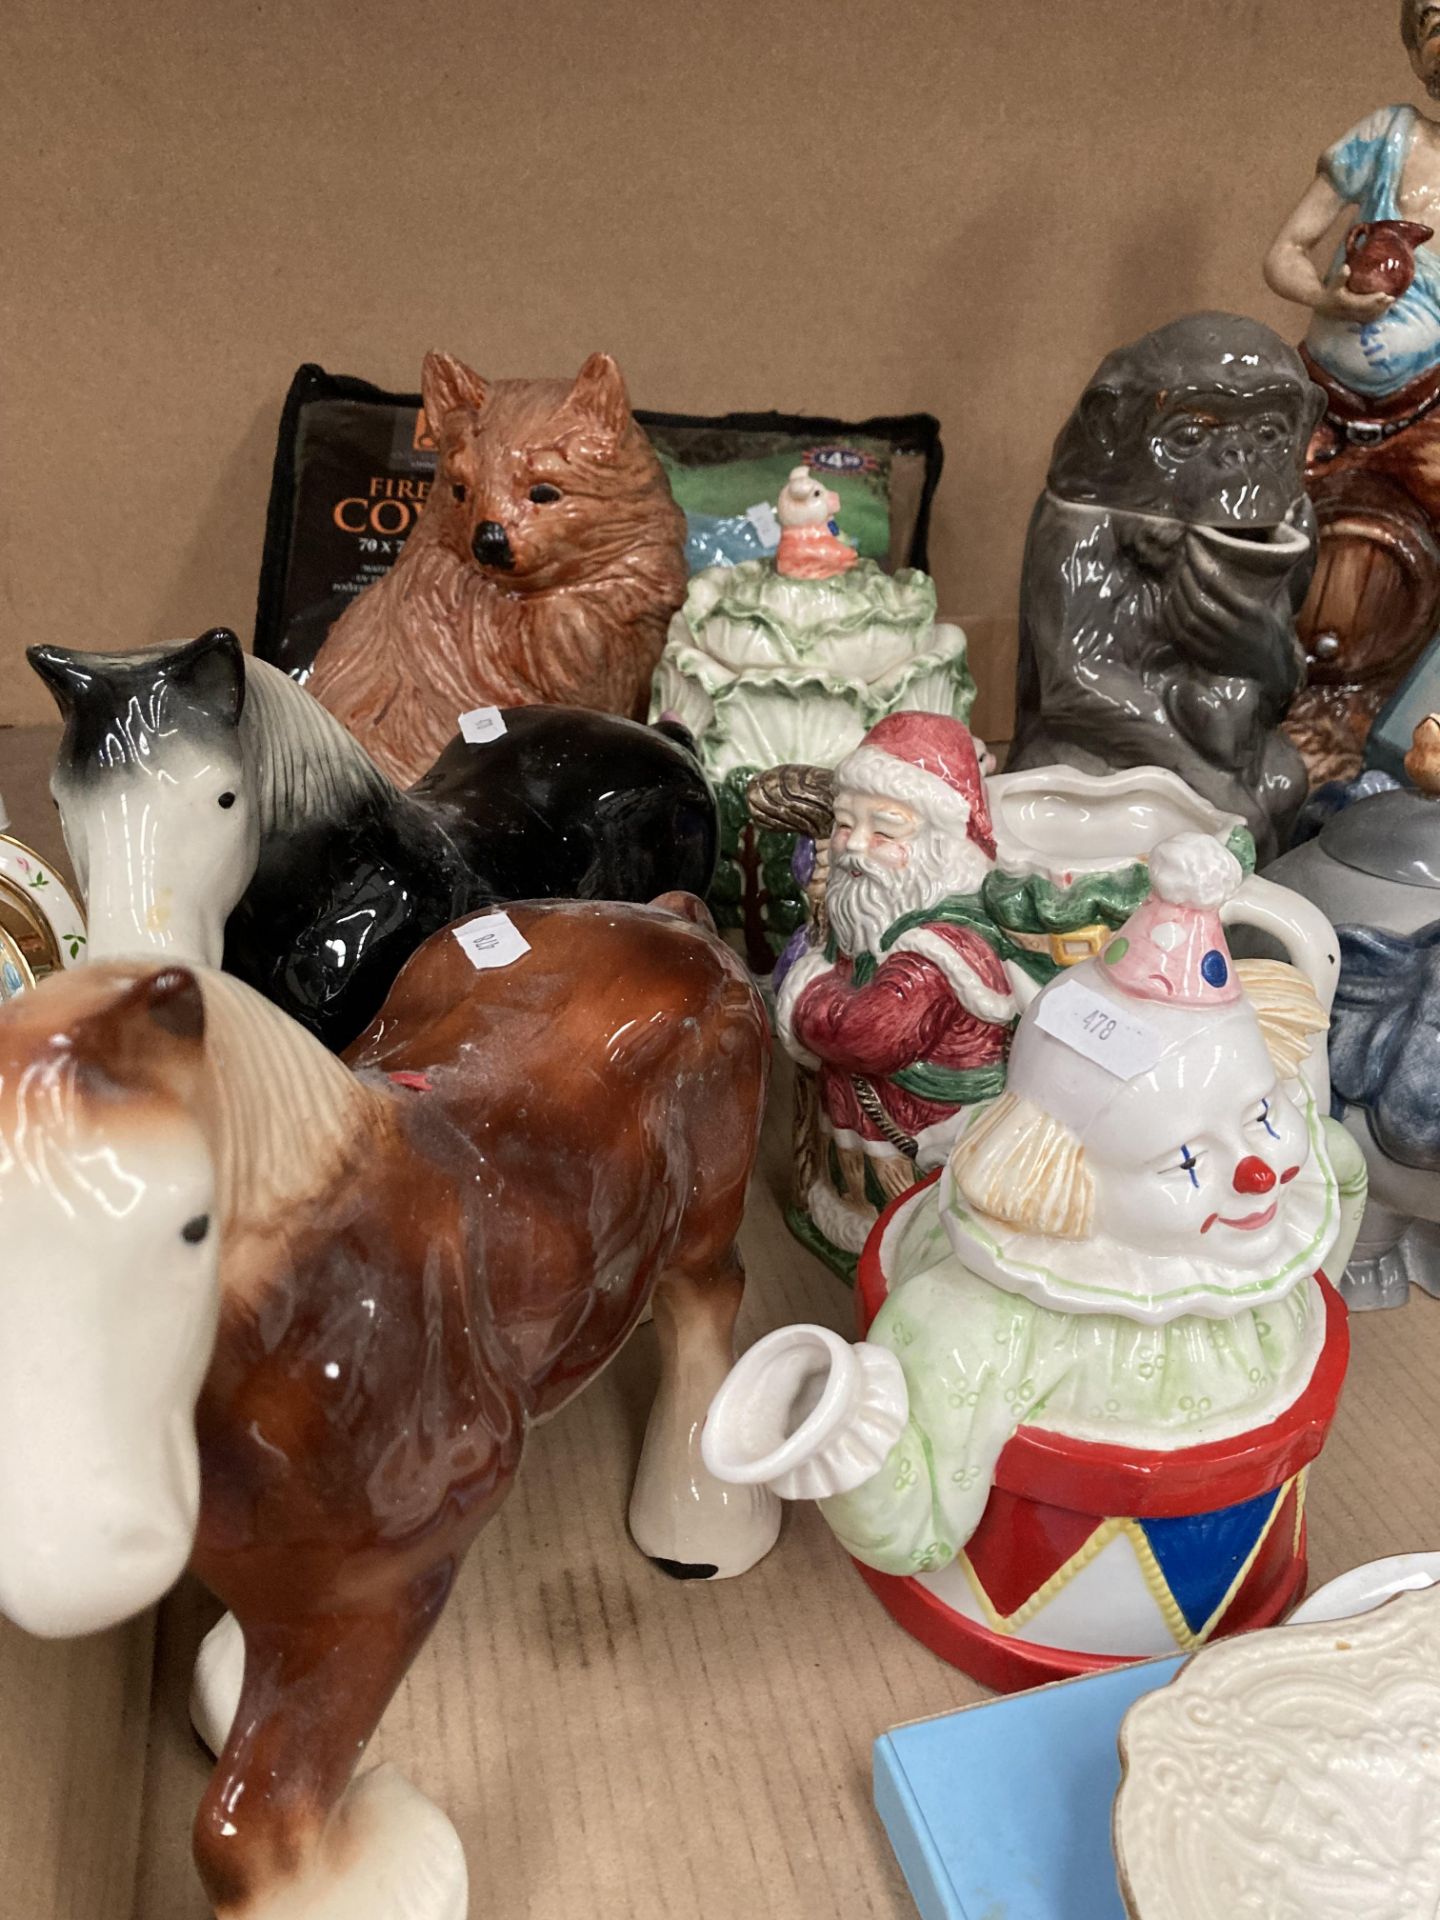 Contents to tray - novelty teapots, ornaments, plates, etc. - Image 2 of 3